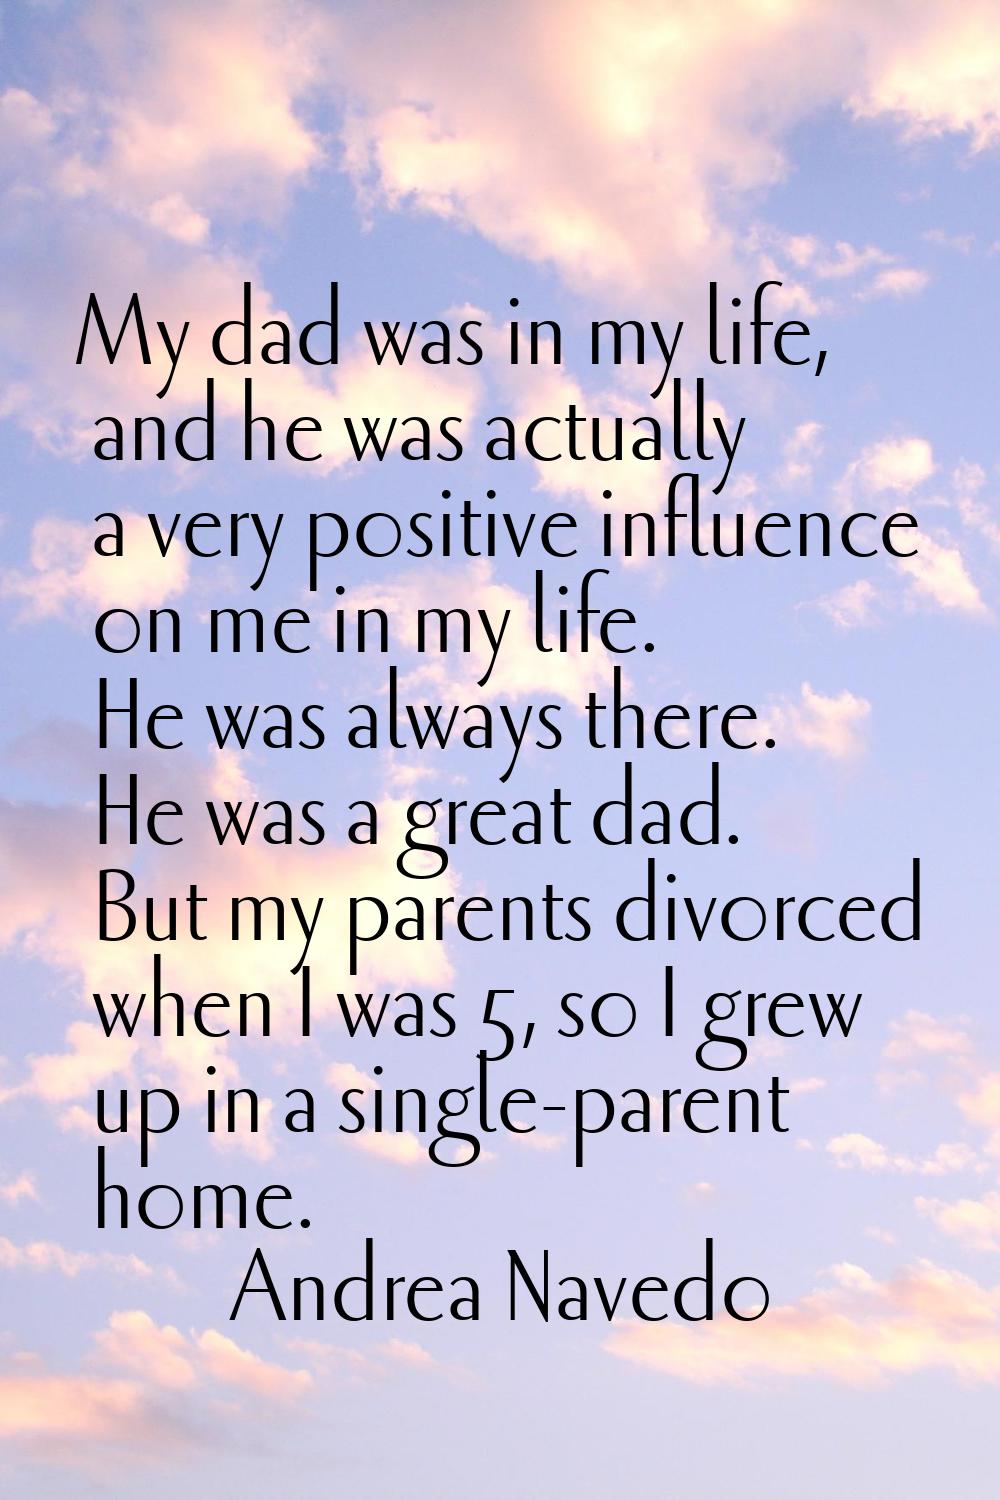 My dad was in my life, and he was actually a very positive influence on me in my life. He was alway